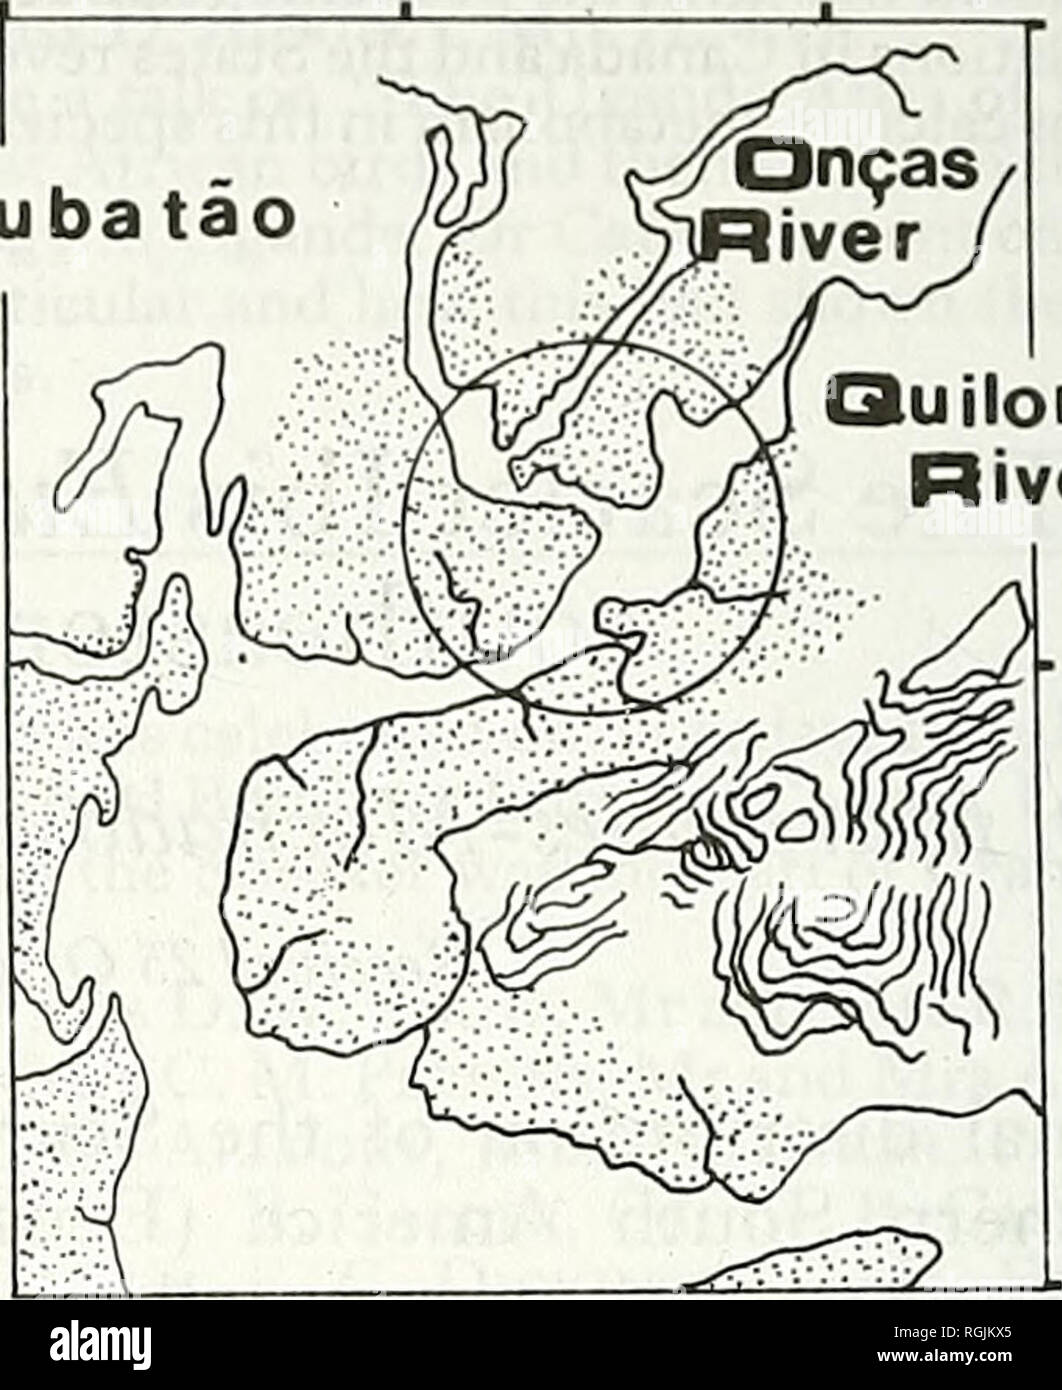 . Bulletin of the British Ornithologists' Club. Birds. Quilombo River. 53' 55' km Figure 1. The estuarine system of Santos, SP, Brazil. The circle indicates the area in which feeding, roosting and nest building of the Scarlet Ibis Eudocimus ruber took place. The dotted area represents the mangroves. the shore or from a small boat. We recorded the number of birds, their spacial distribution, and the presence of nests and their characteristics, but avoided close inspection of the nests to minimize disturbance. We also obtained some information from the boatman, who has lived in the region for ma Stock Photo